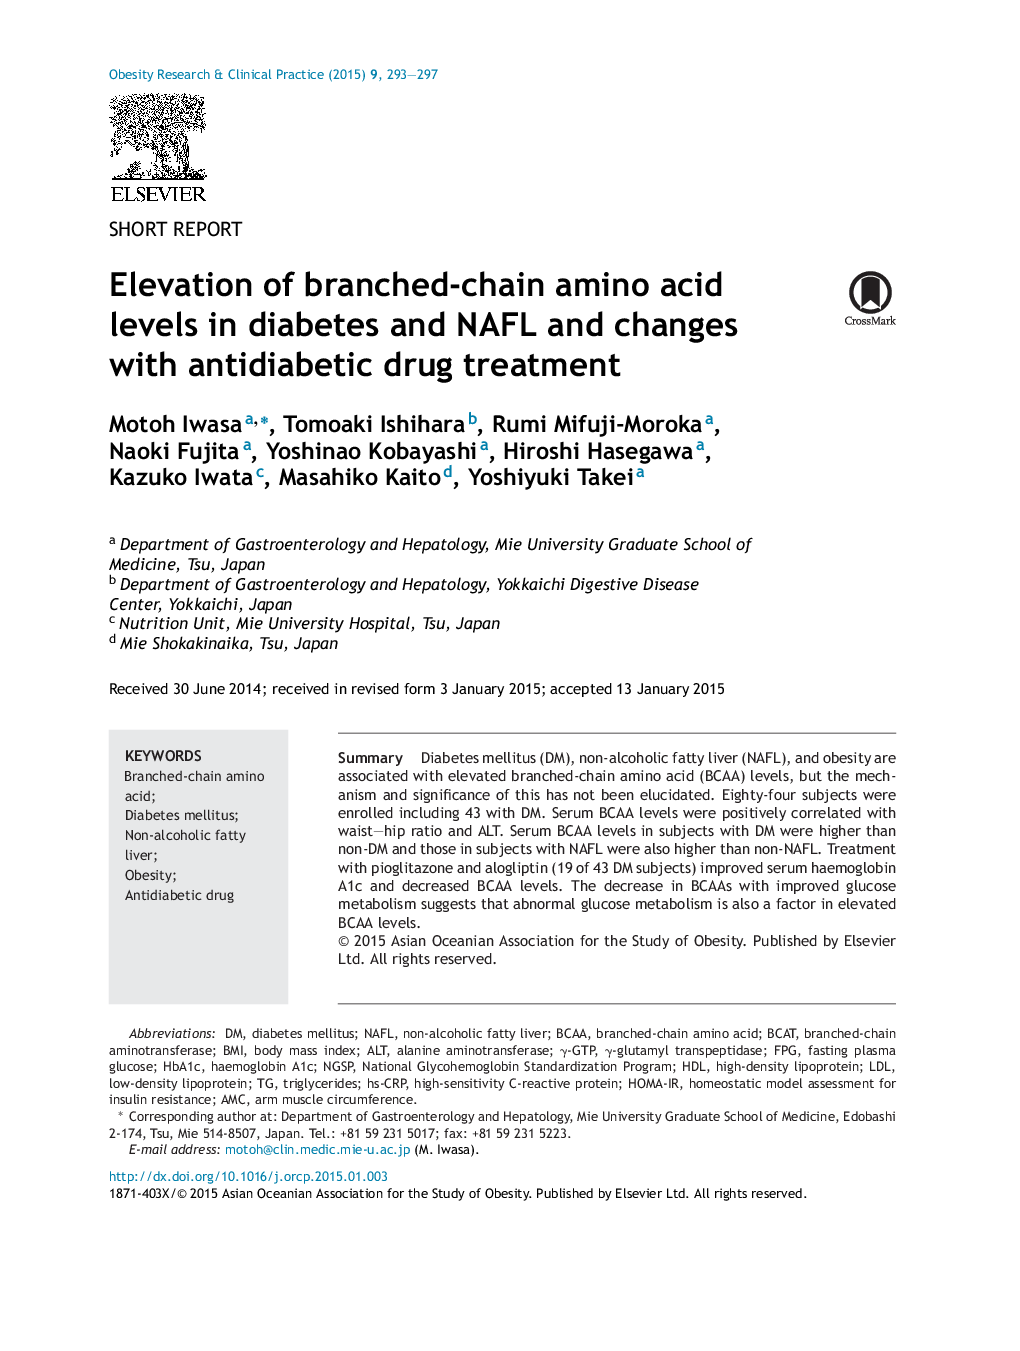 Elevation of branched-chain amino acid levels in diabetes and NAFL and changes with antidiabetic drug treatment